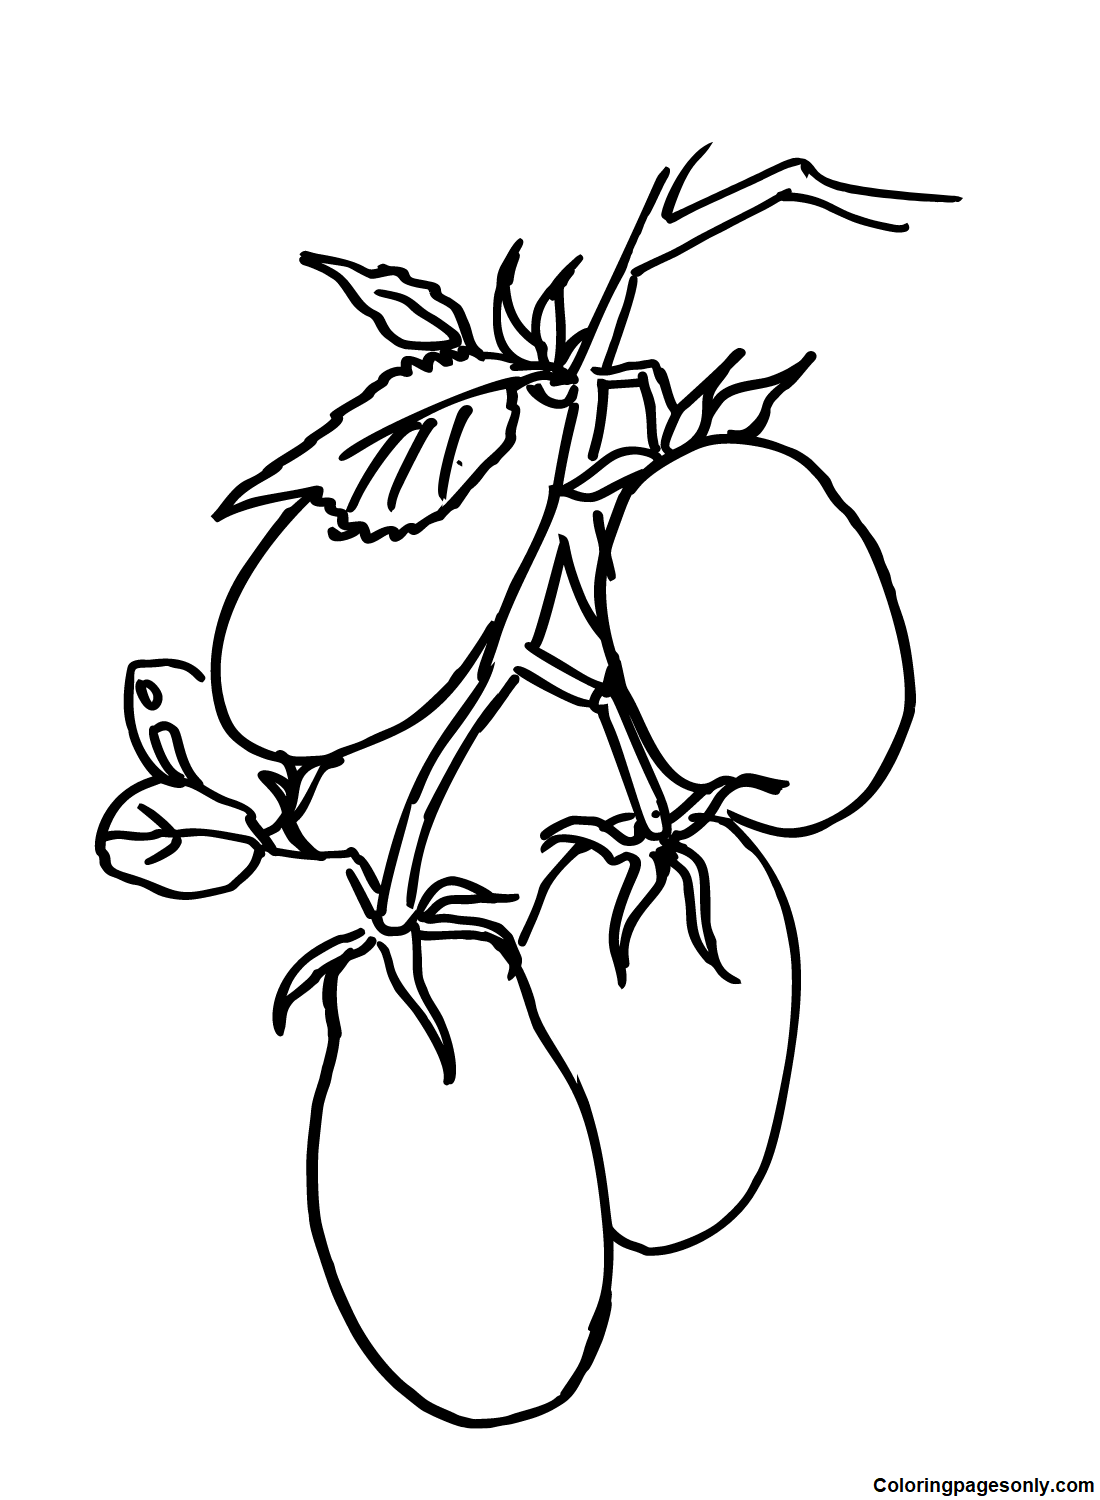 Cherry Tomato Coloring Pages